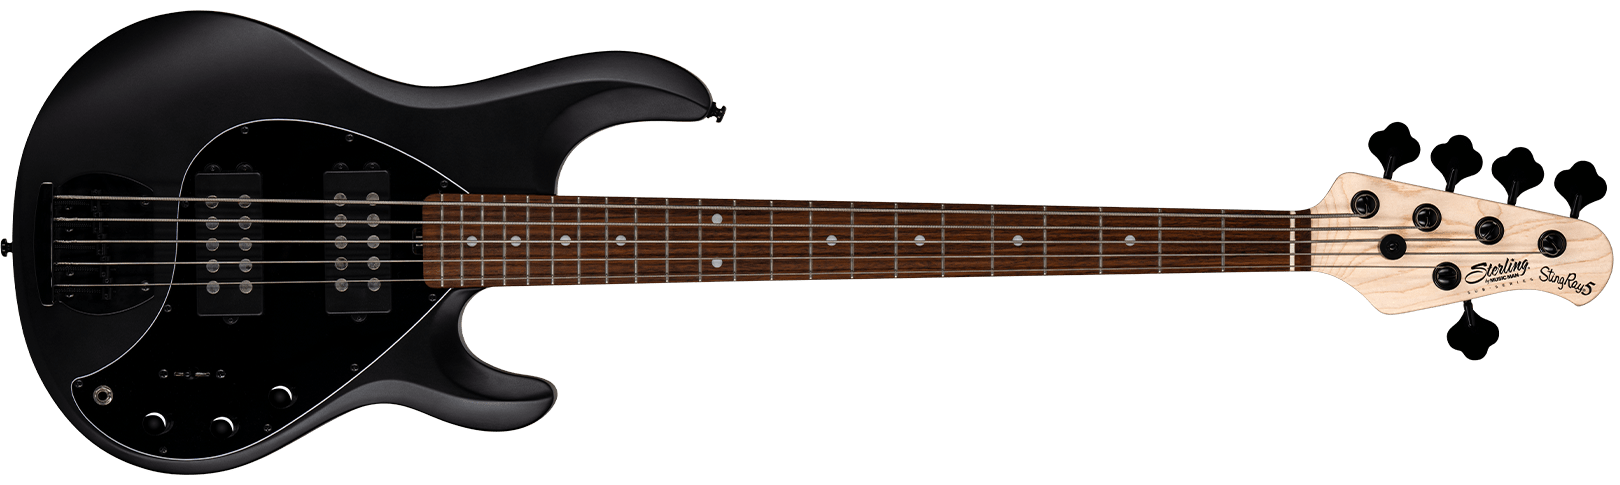 The StingRay Ray5HH bass in Stealth Black front details.